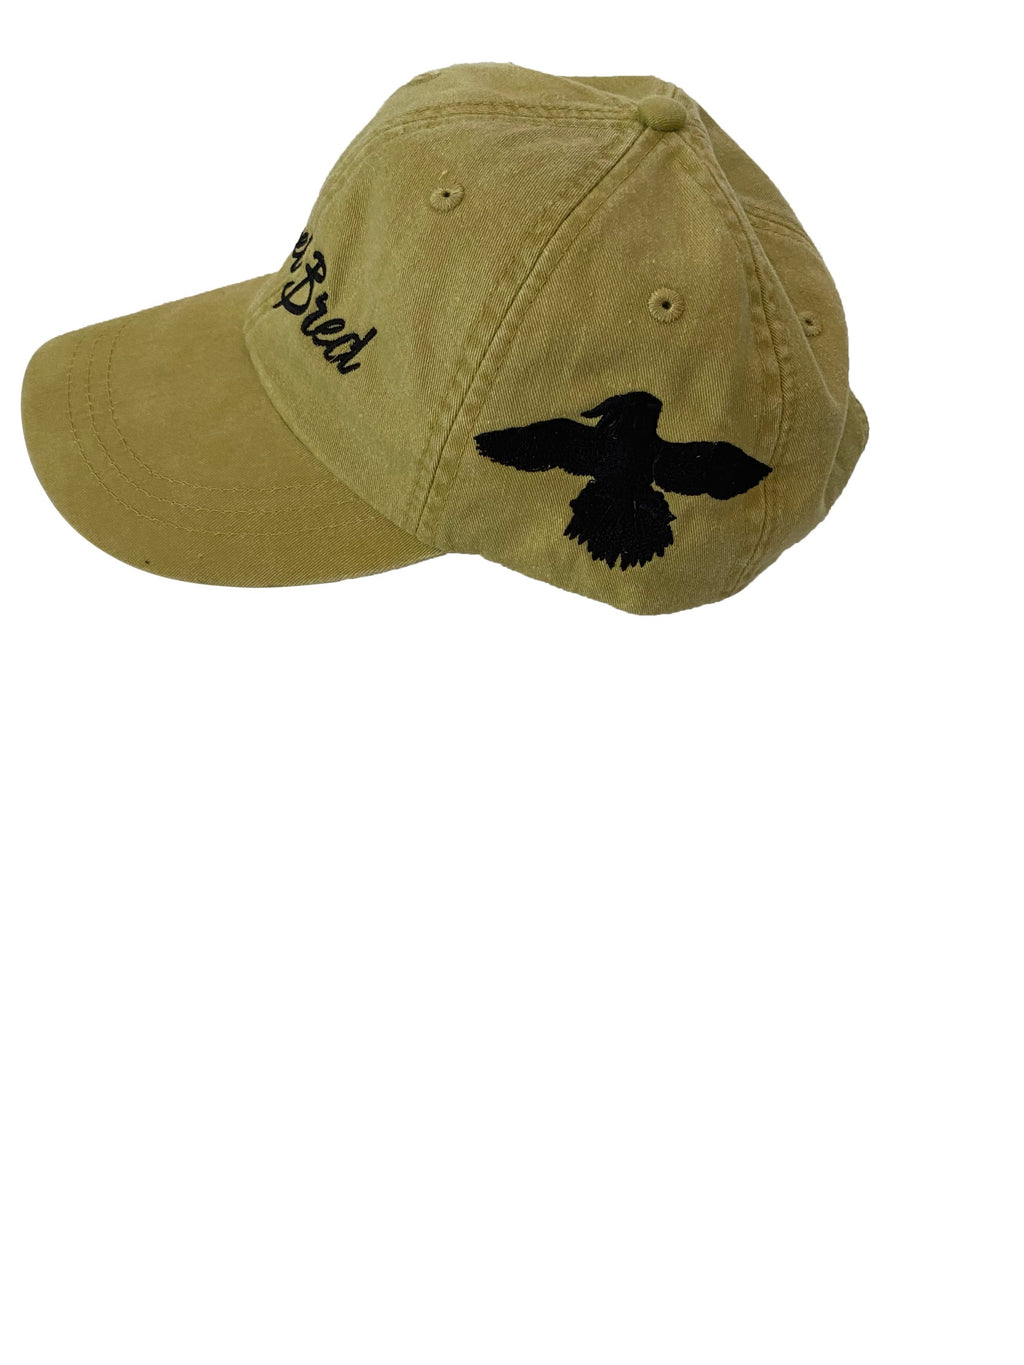 urban streetwear brand, dad hat with embroidered logo